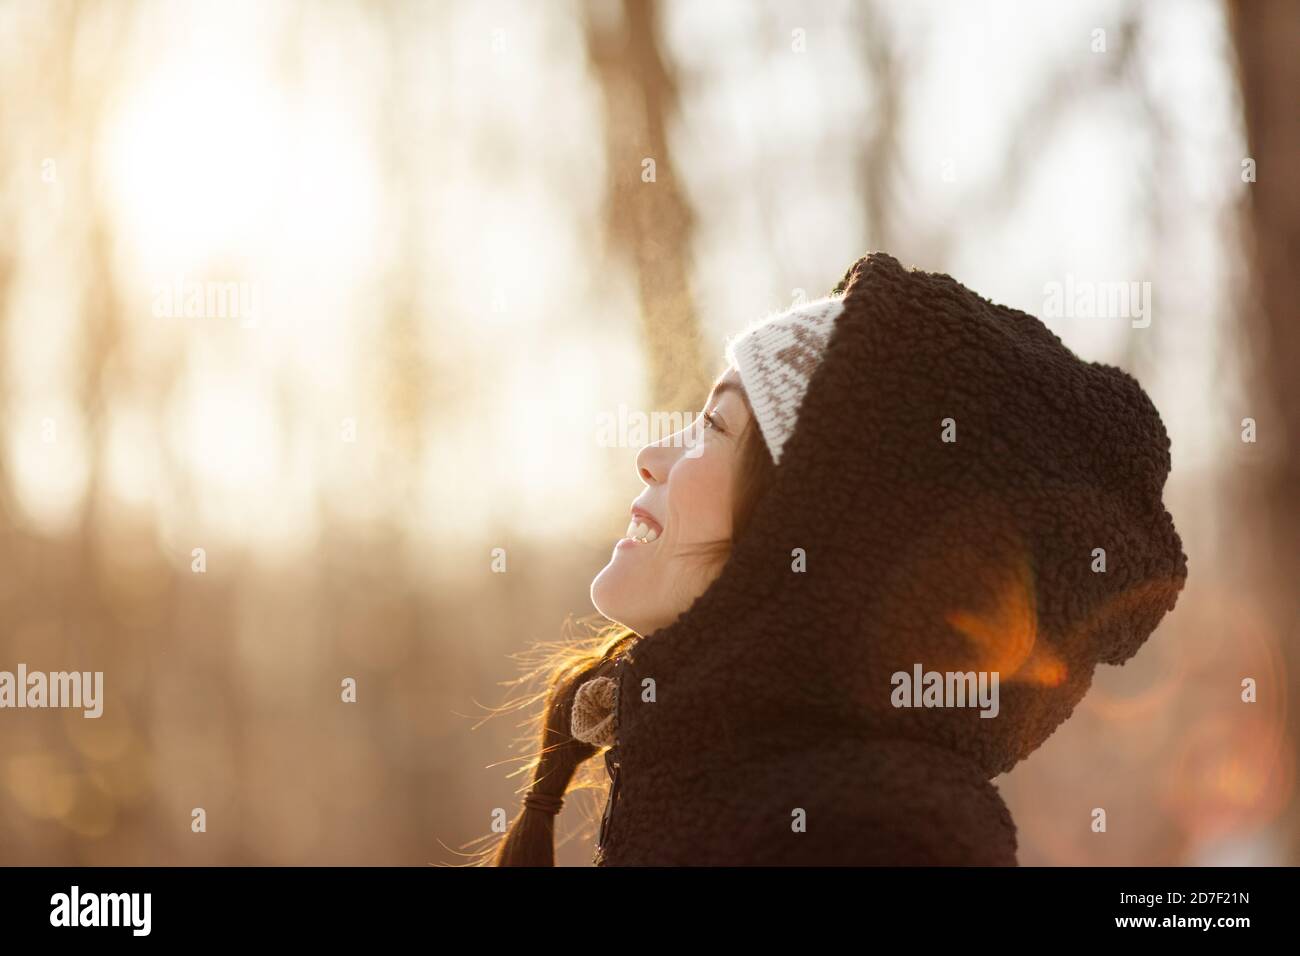 Winter happy woman breathing cold air outside young people lifestyle. Asian girl looking up at snow falling in forest wearing hooded jacket Stock Photo